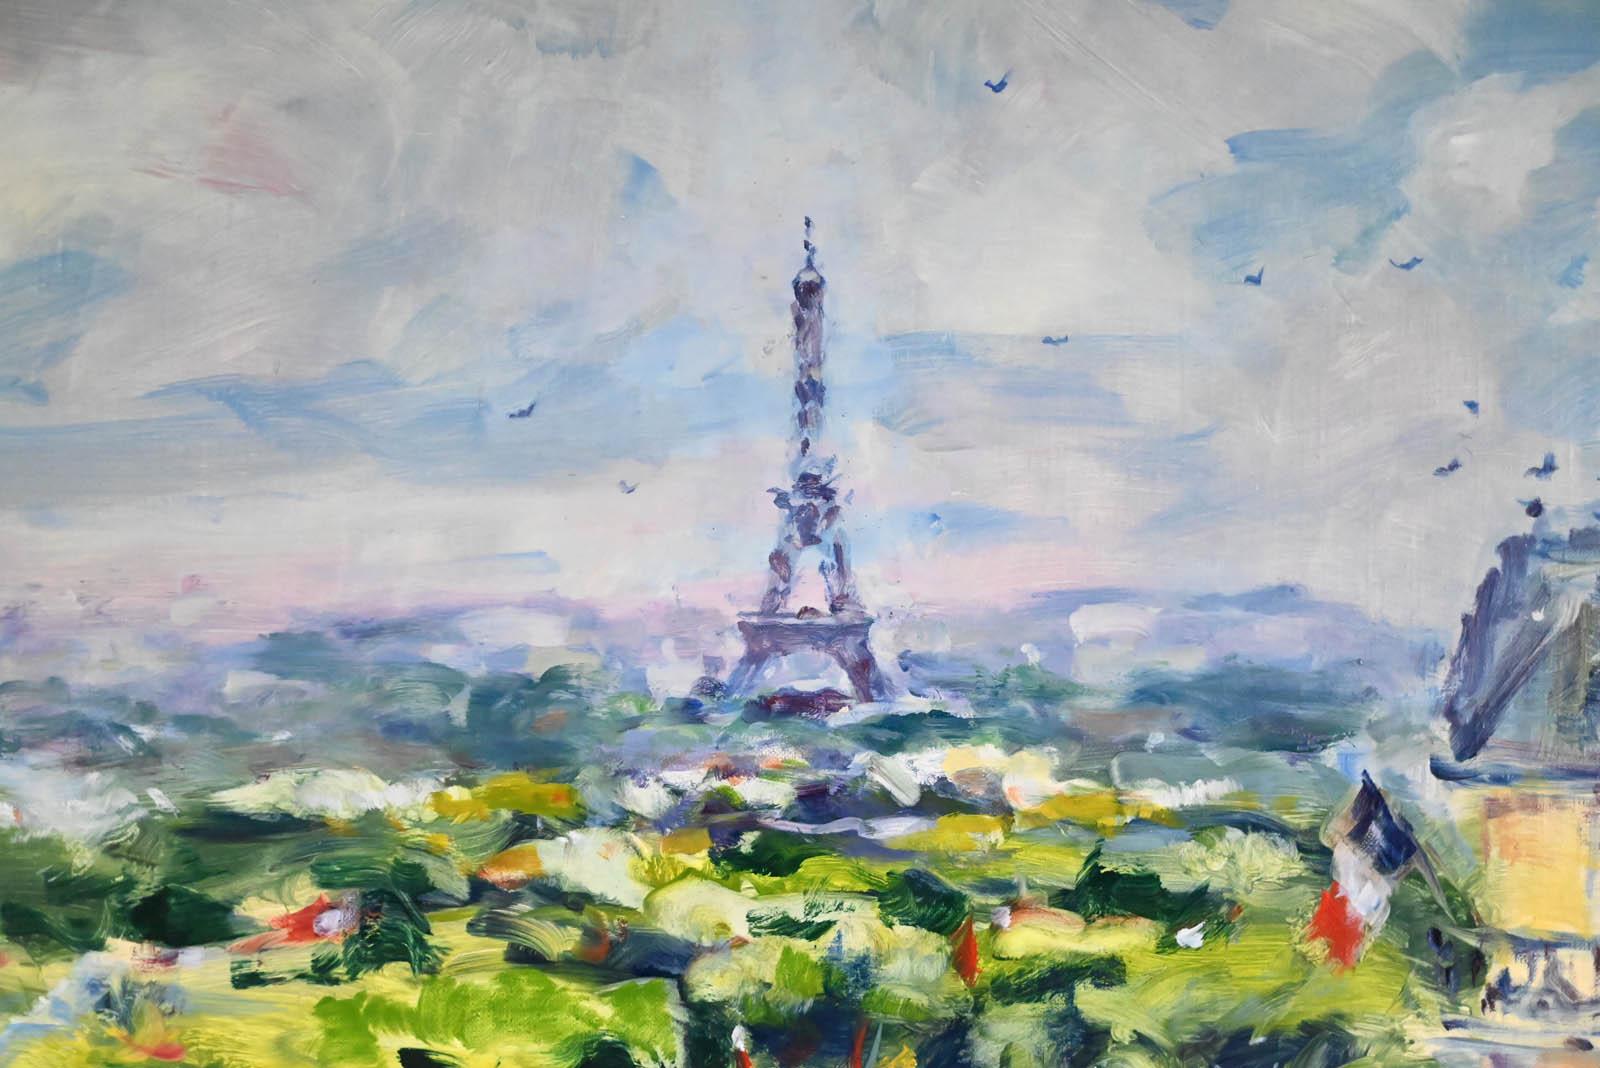 Georges YOLDJOGLOU ( né en 1933)

Paris, vue sur les jardins de la Tour Eiffel

Oil on canvas
Size : 60 x 73cm
Signed lower right
Titled on the back.
Painting in perfect condition.
Frameless.

Sold with invoice and certificate of authenticity